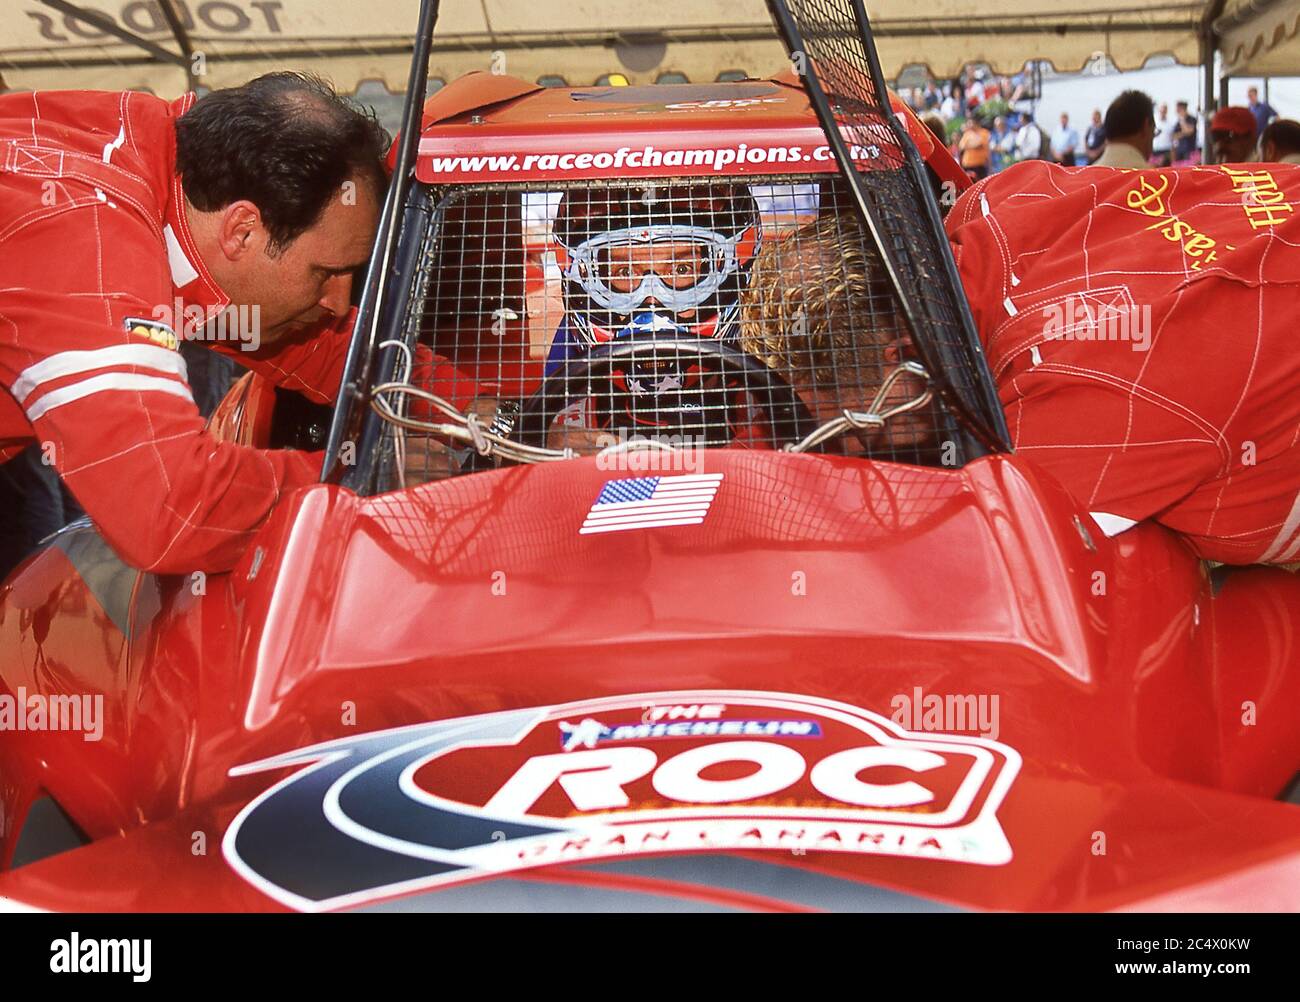 Colin Edwards of the USA team at the ROC Race of Champions Gran Caneria Spain 2002 Stock Photo